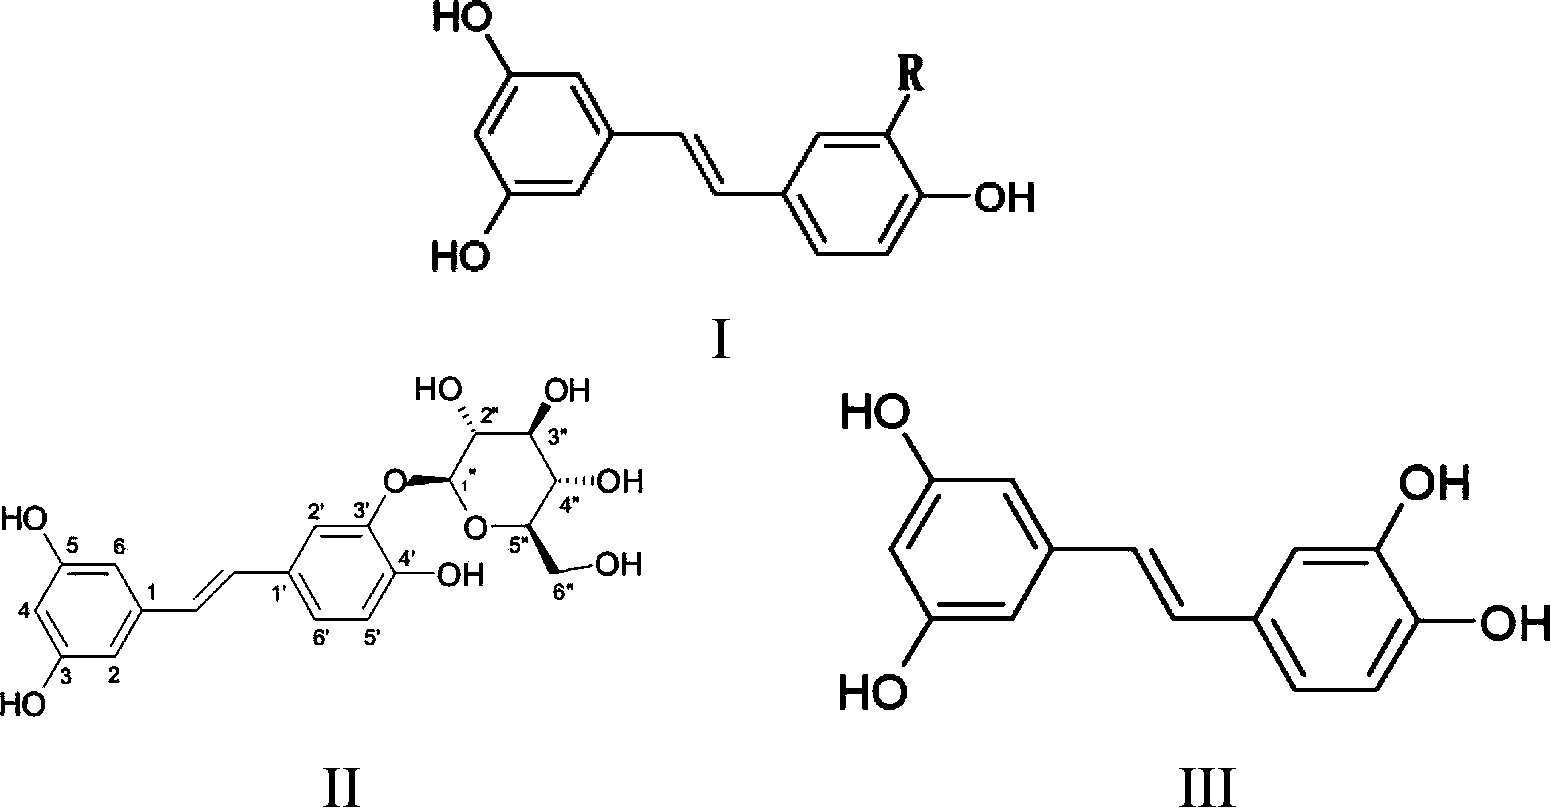 Applications of stilbene compounds